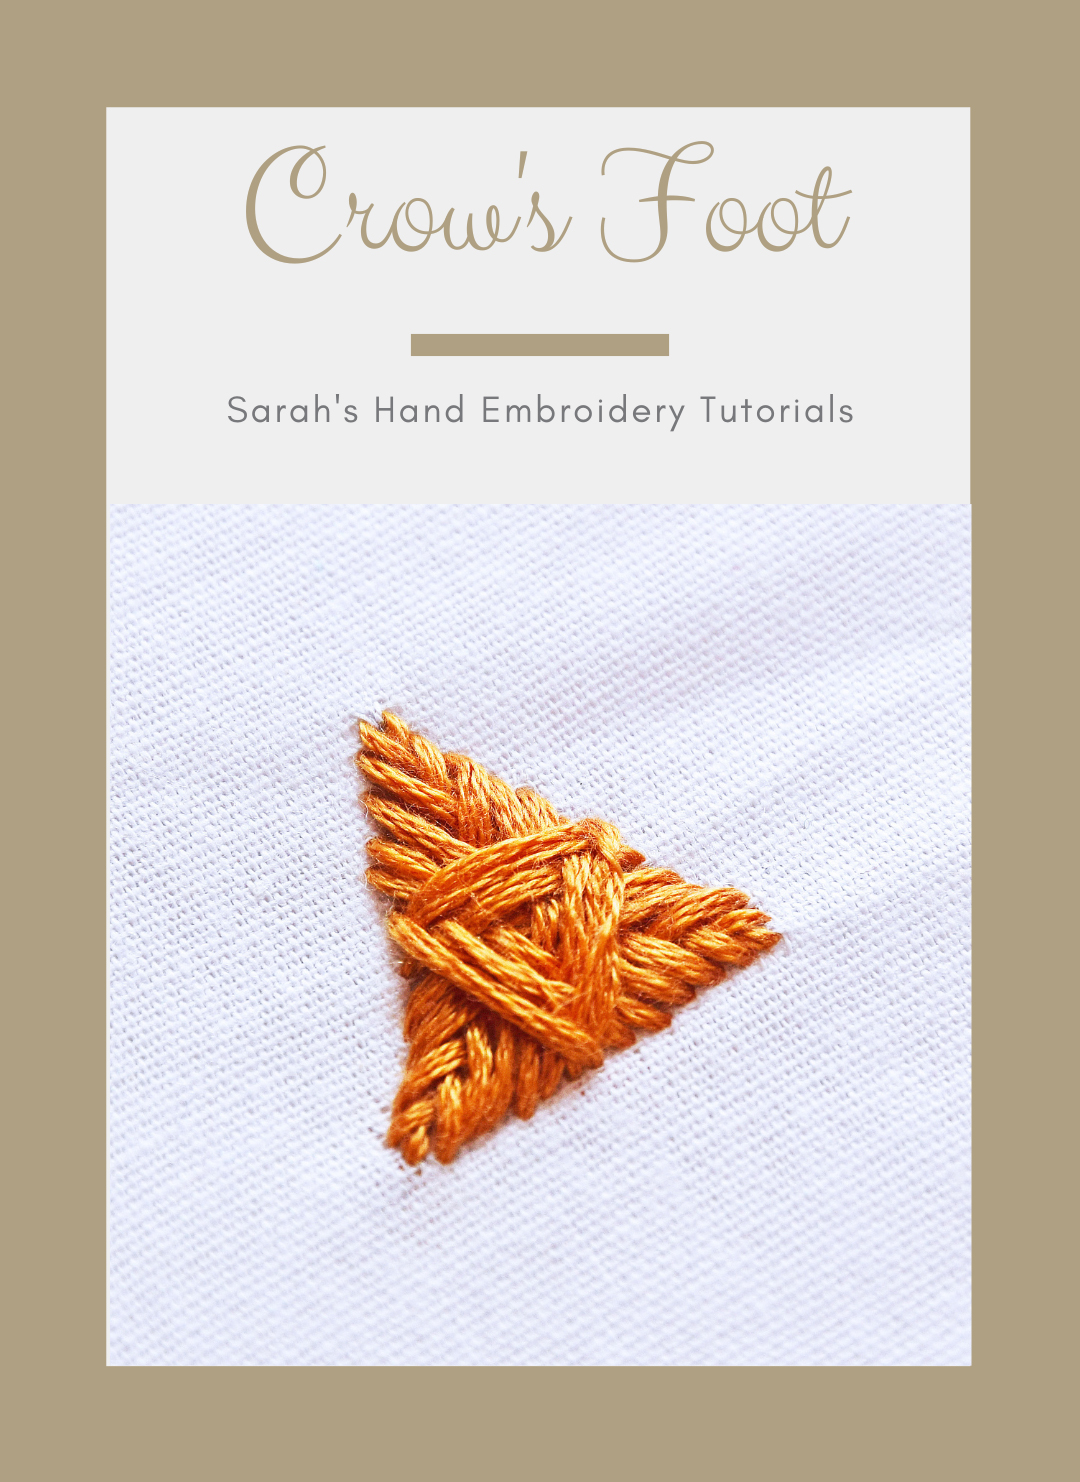 Hand Embroidery FAQ - Sarah's Hand Embroidery Tutorials